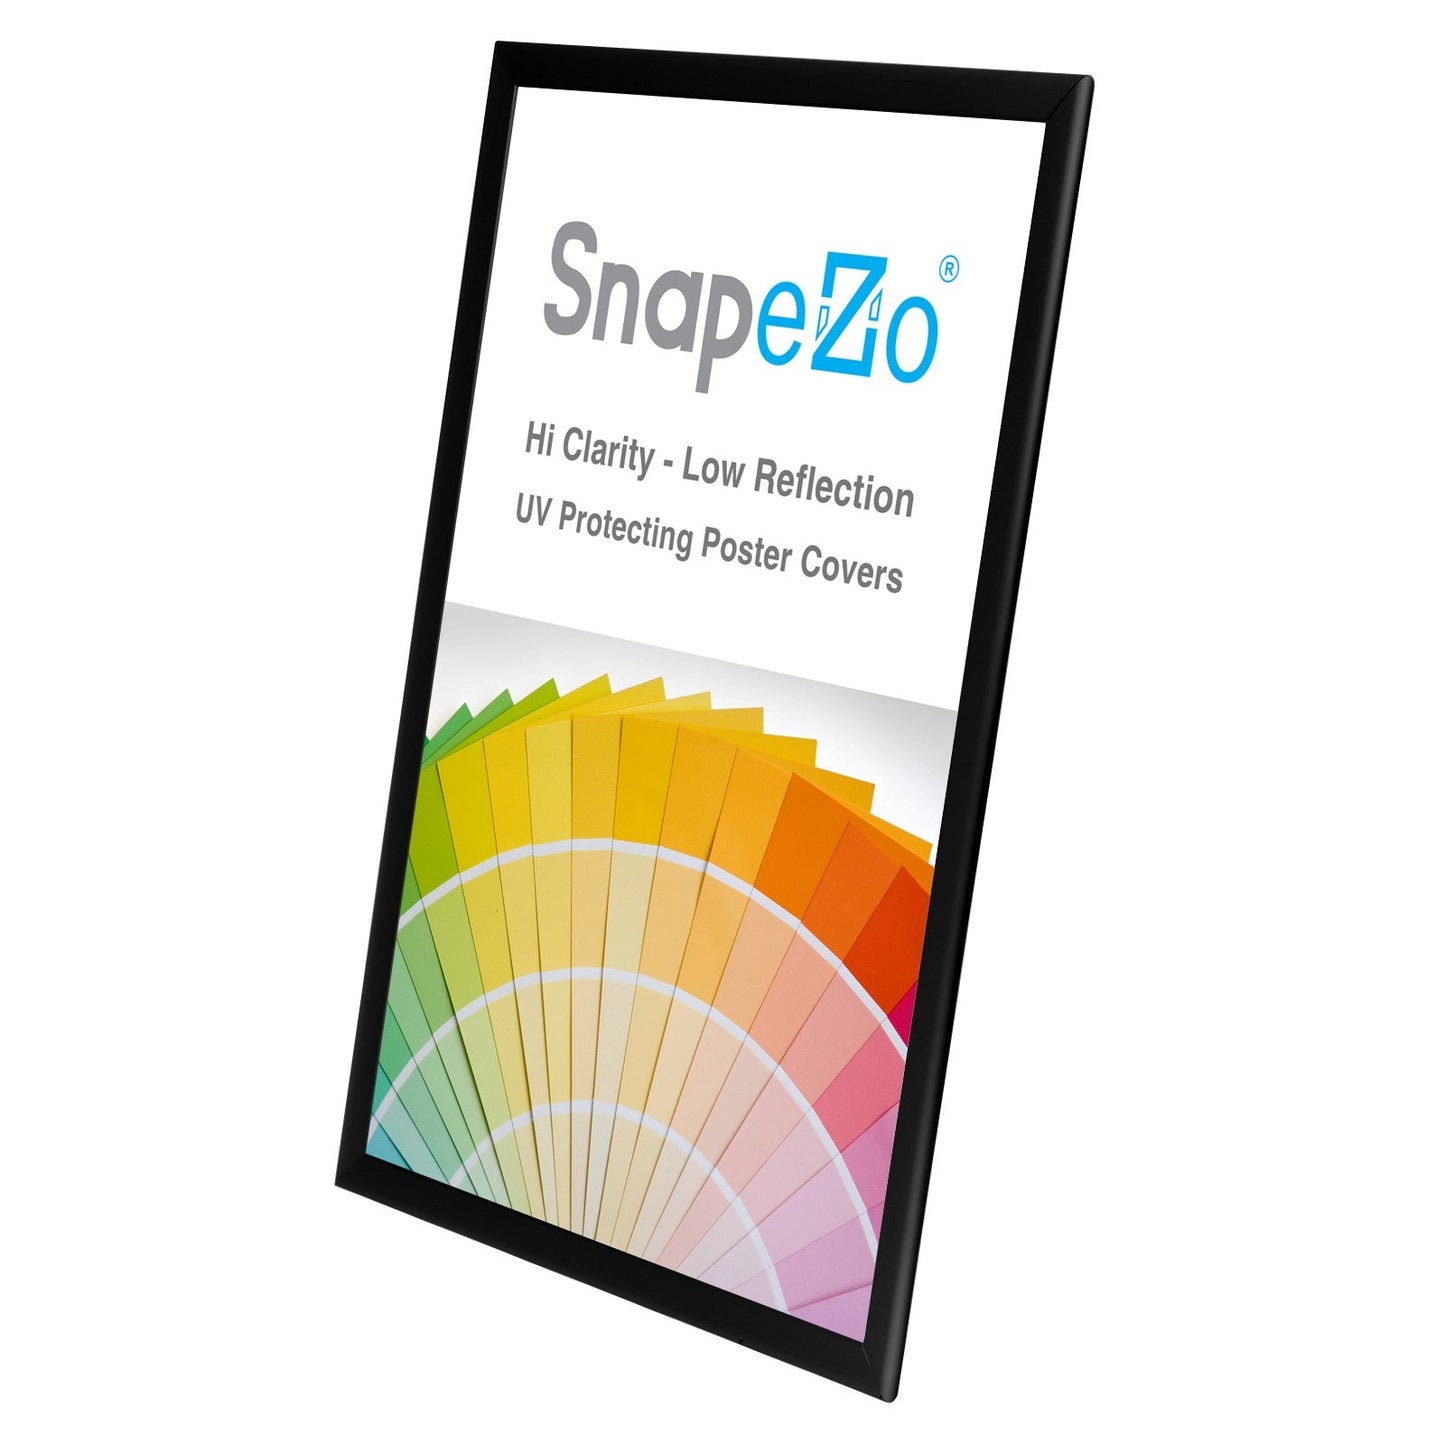 Load image into Gallery viewer, 13x19 Black SnapeZo® Snap Frame - 1.25&amp;quot; Profile
